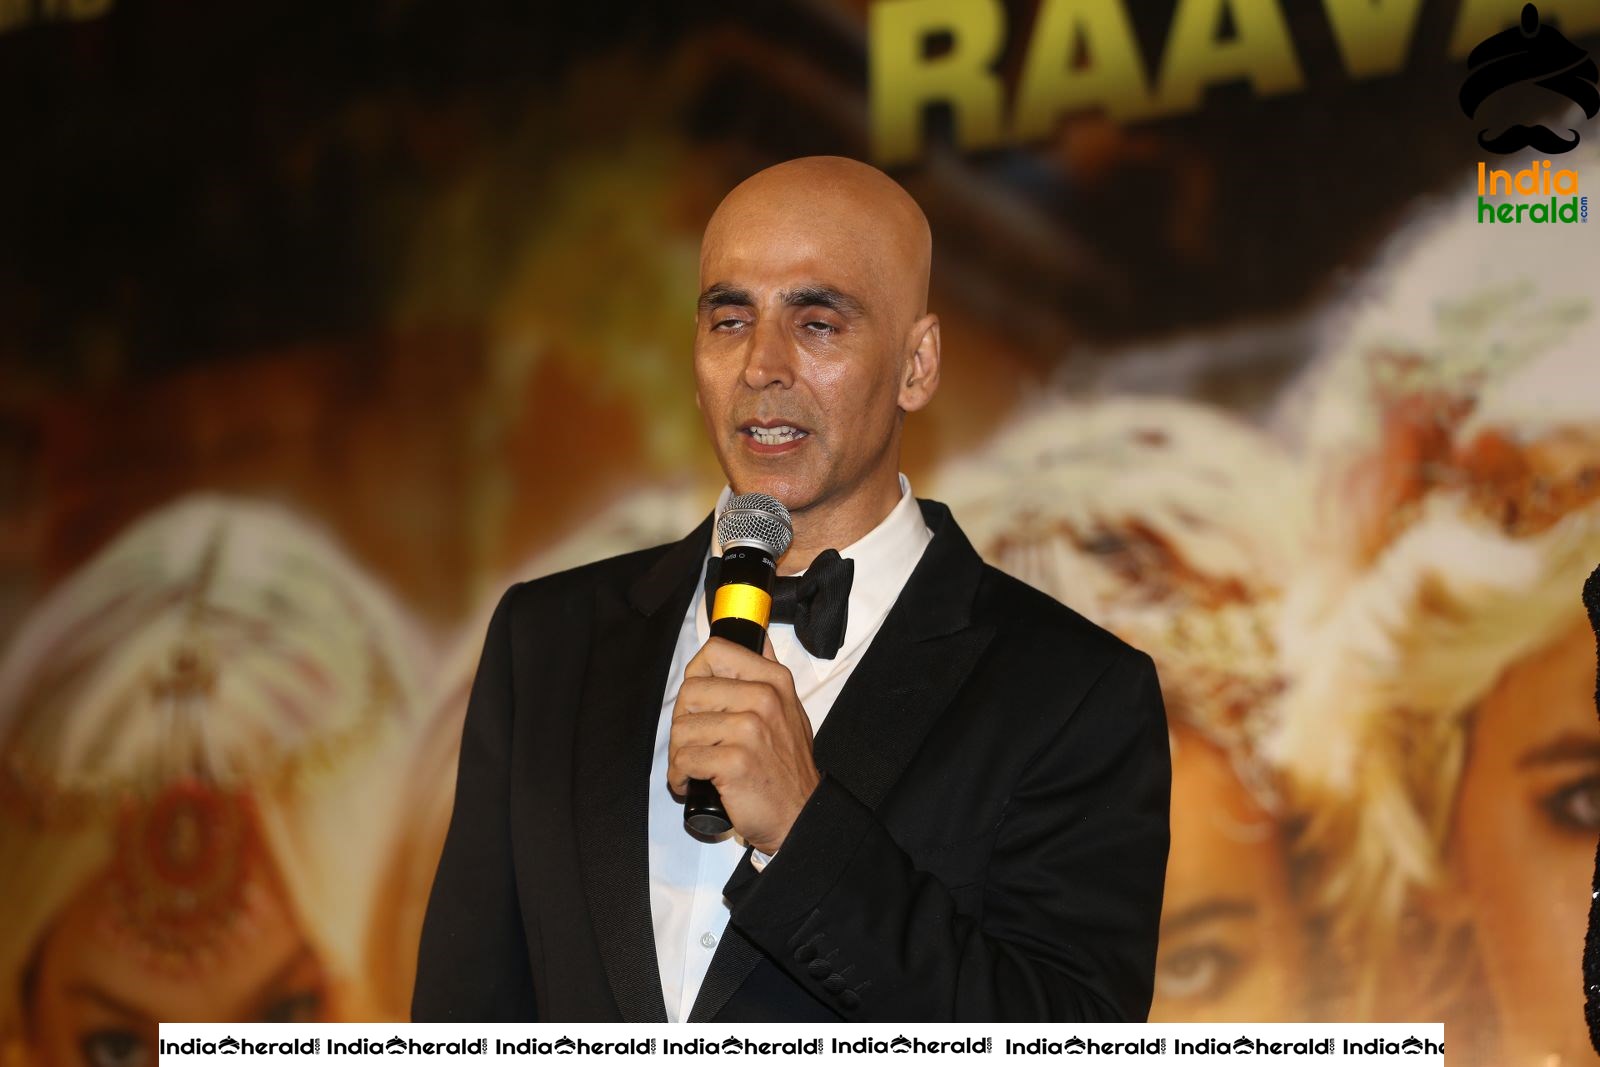 Akshay Kumar seen with Fully Tonsured Head at an event Set 2